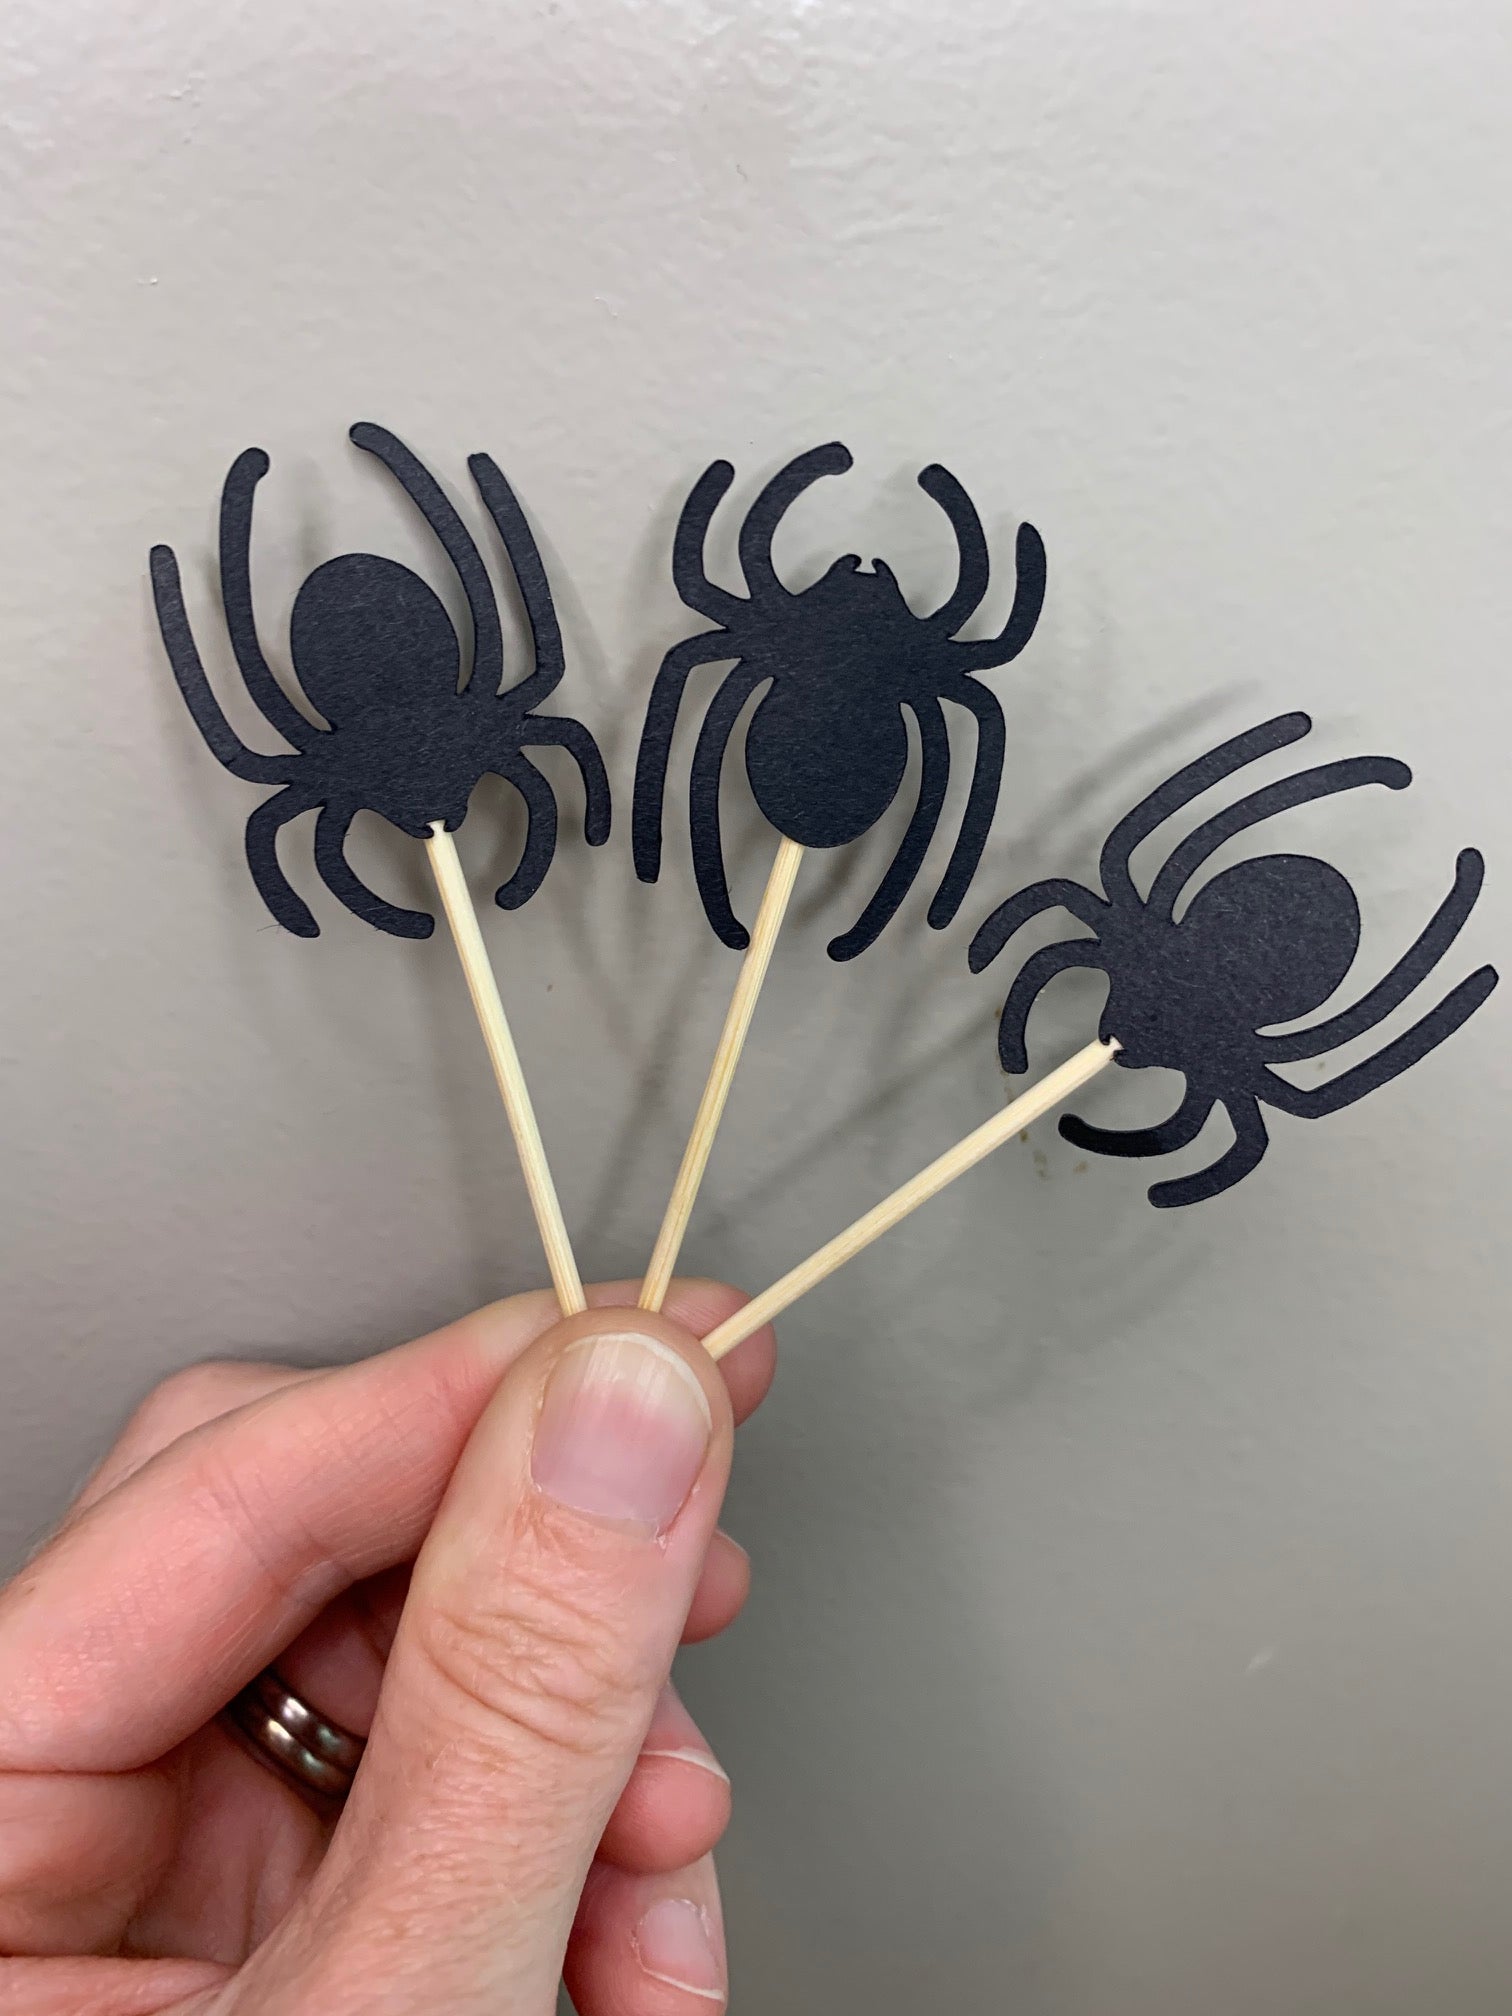 Spider cupcake toppers